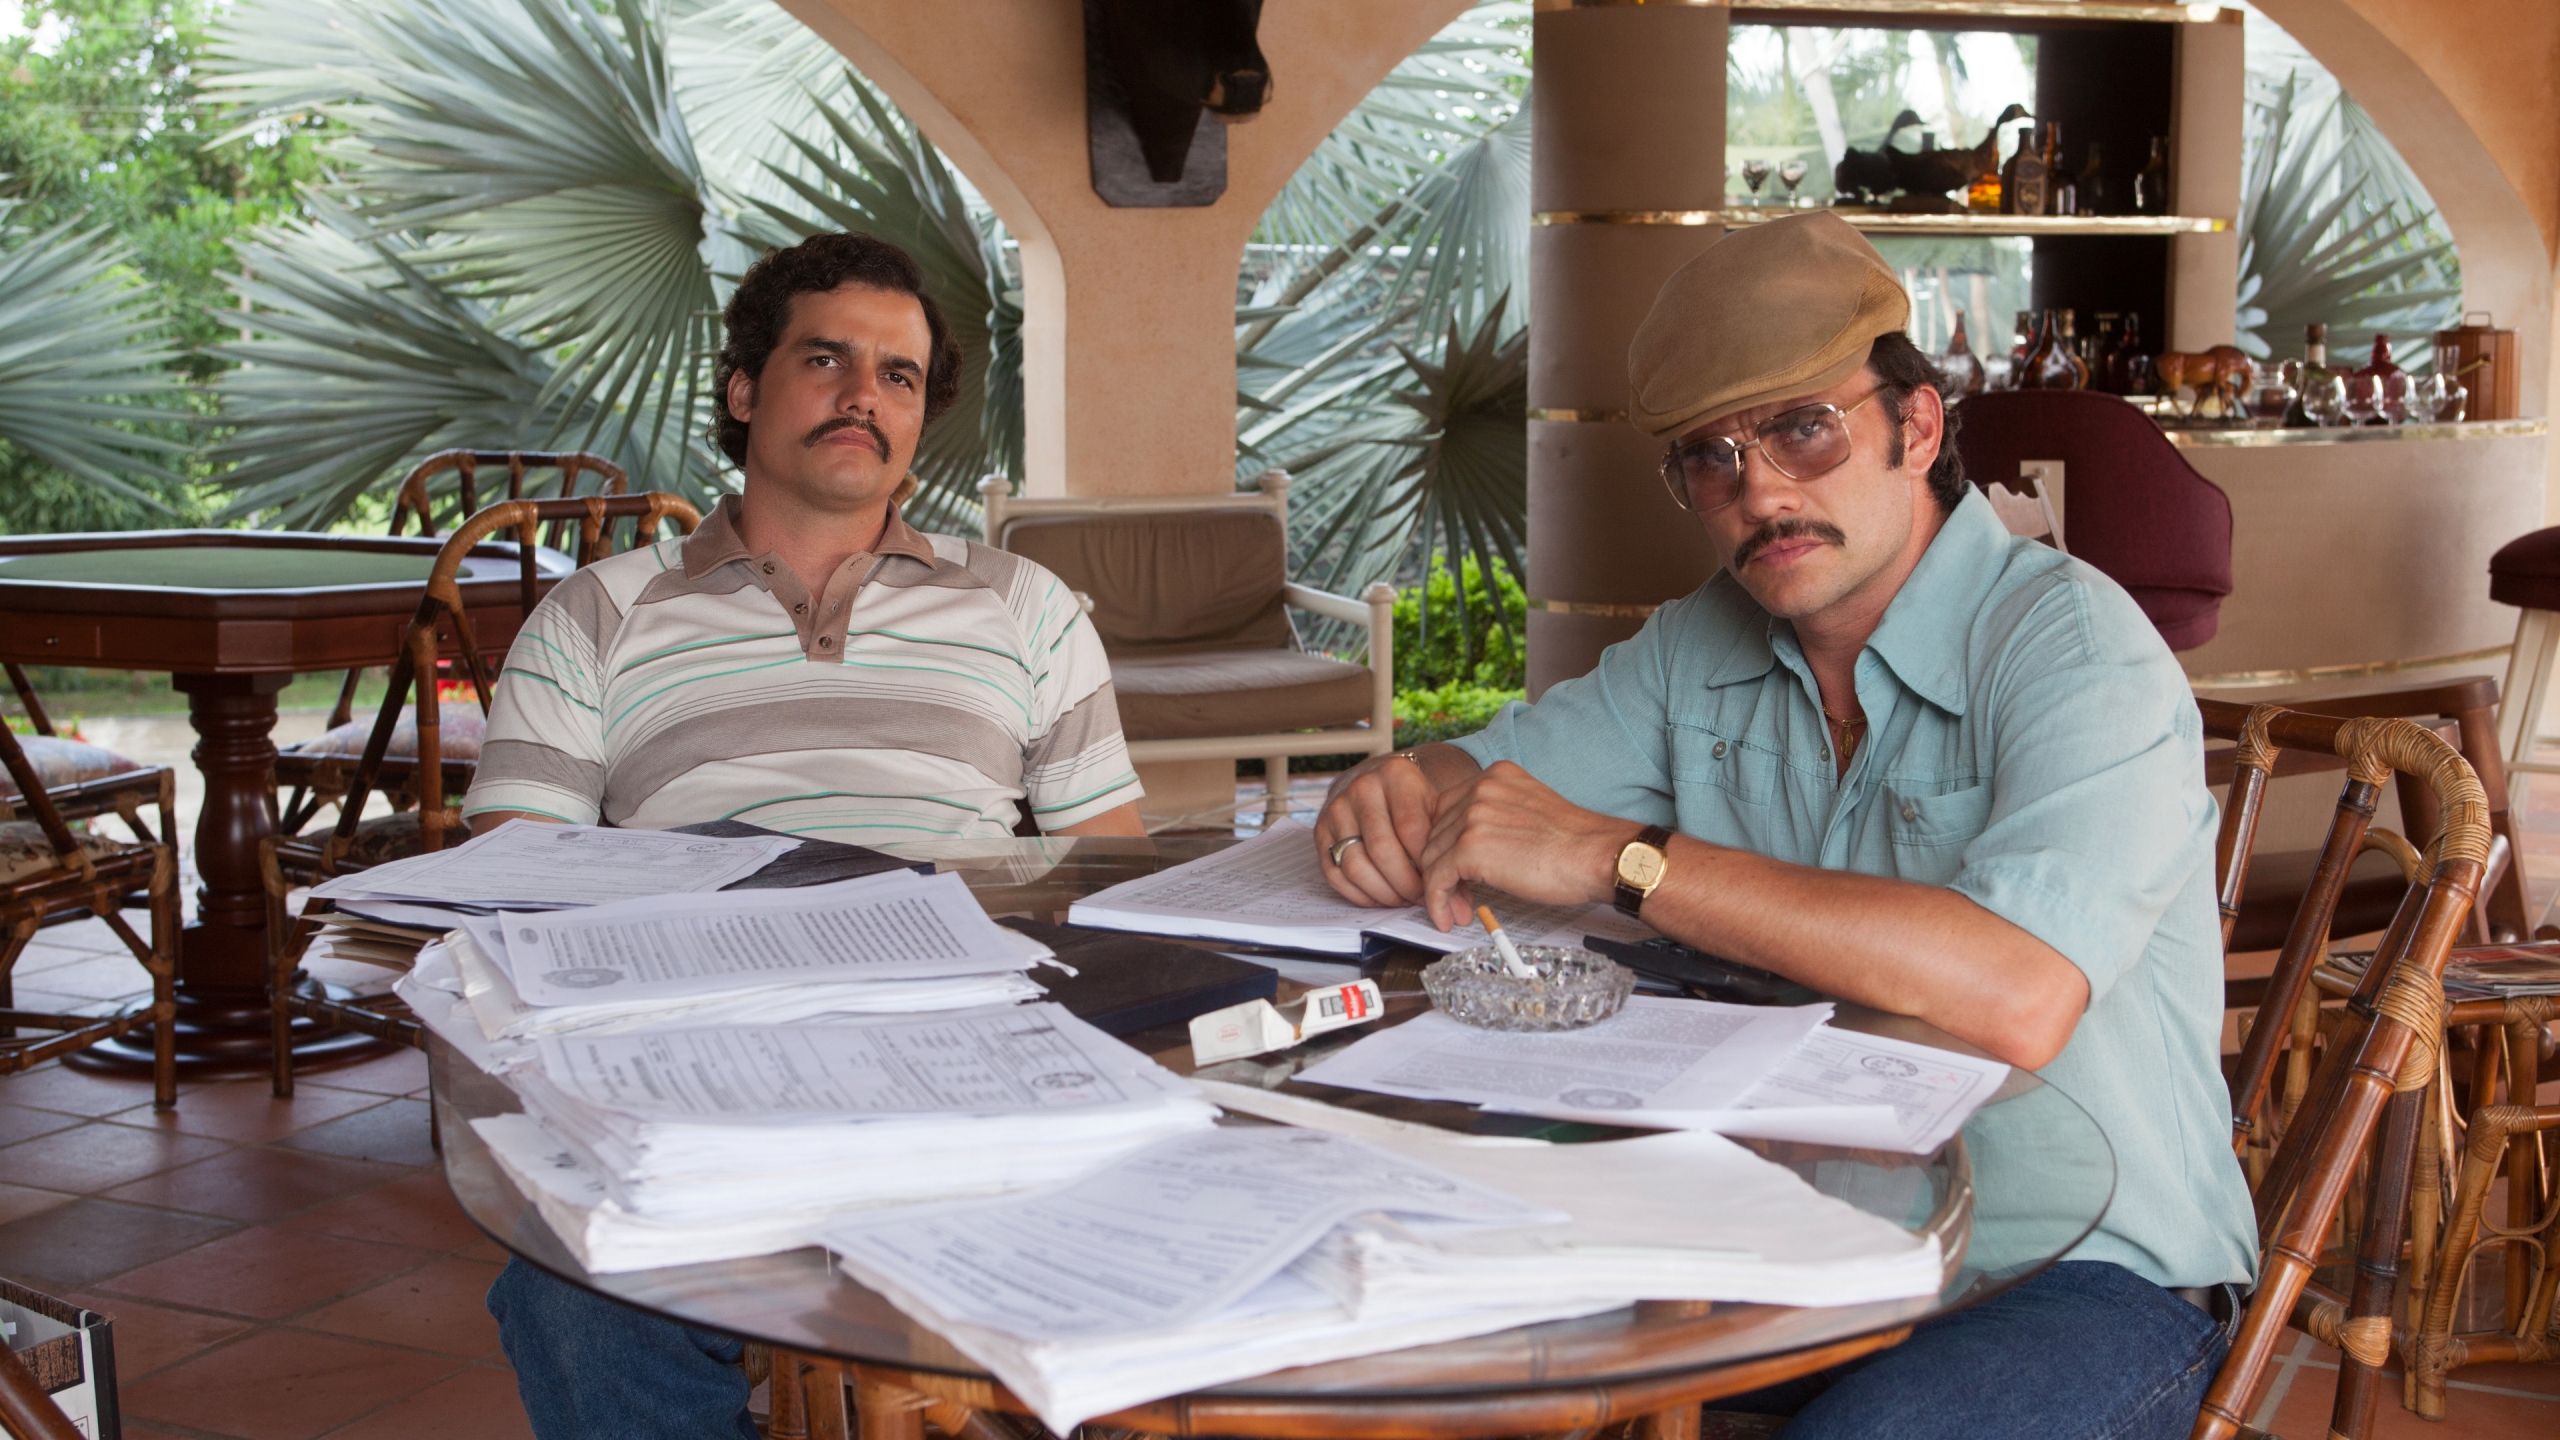 Pablo and Gustavo Narcos for 2560x1440 HDTV resolution